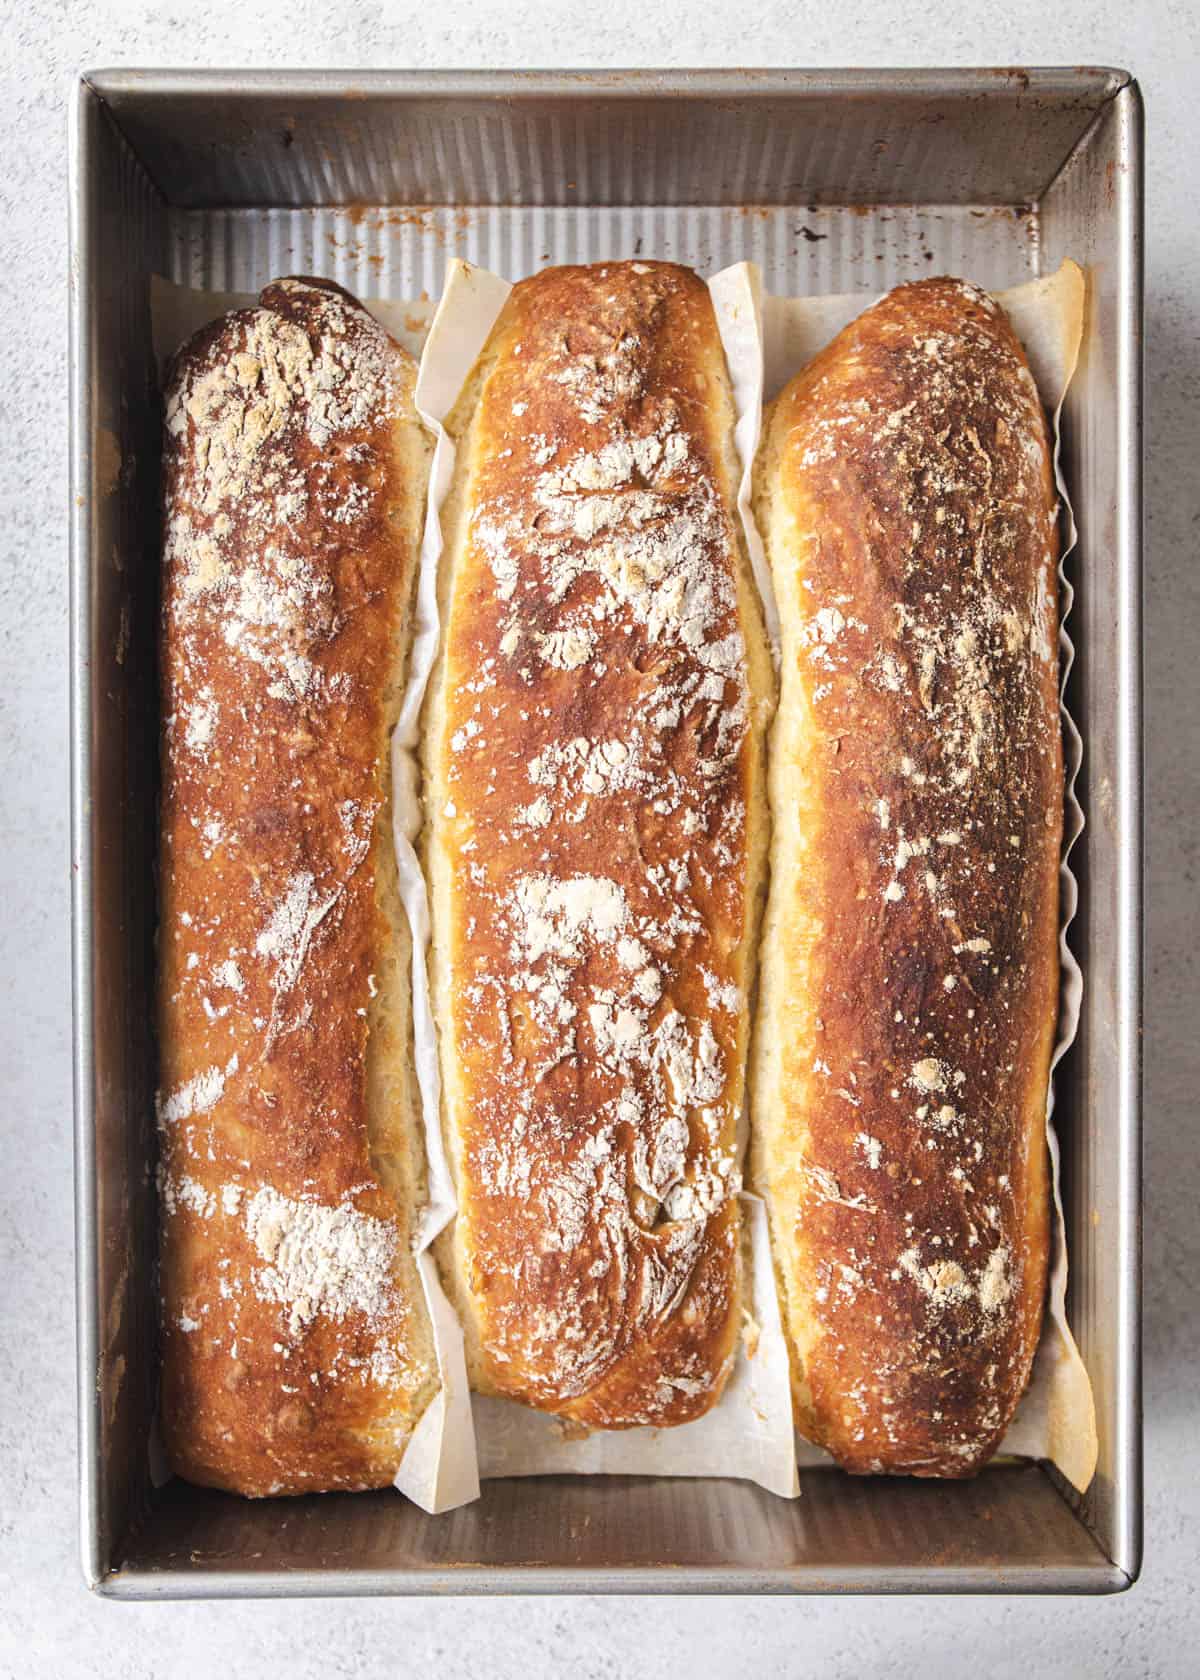 3 baked loaves of French bread in a metal baking pan